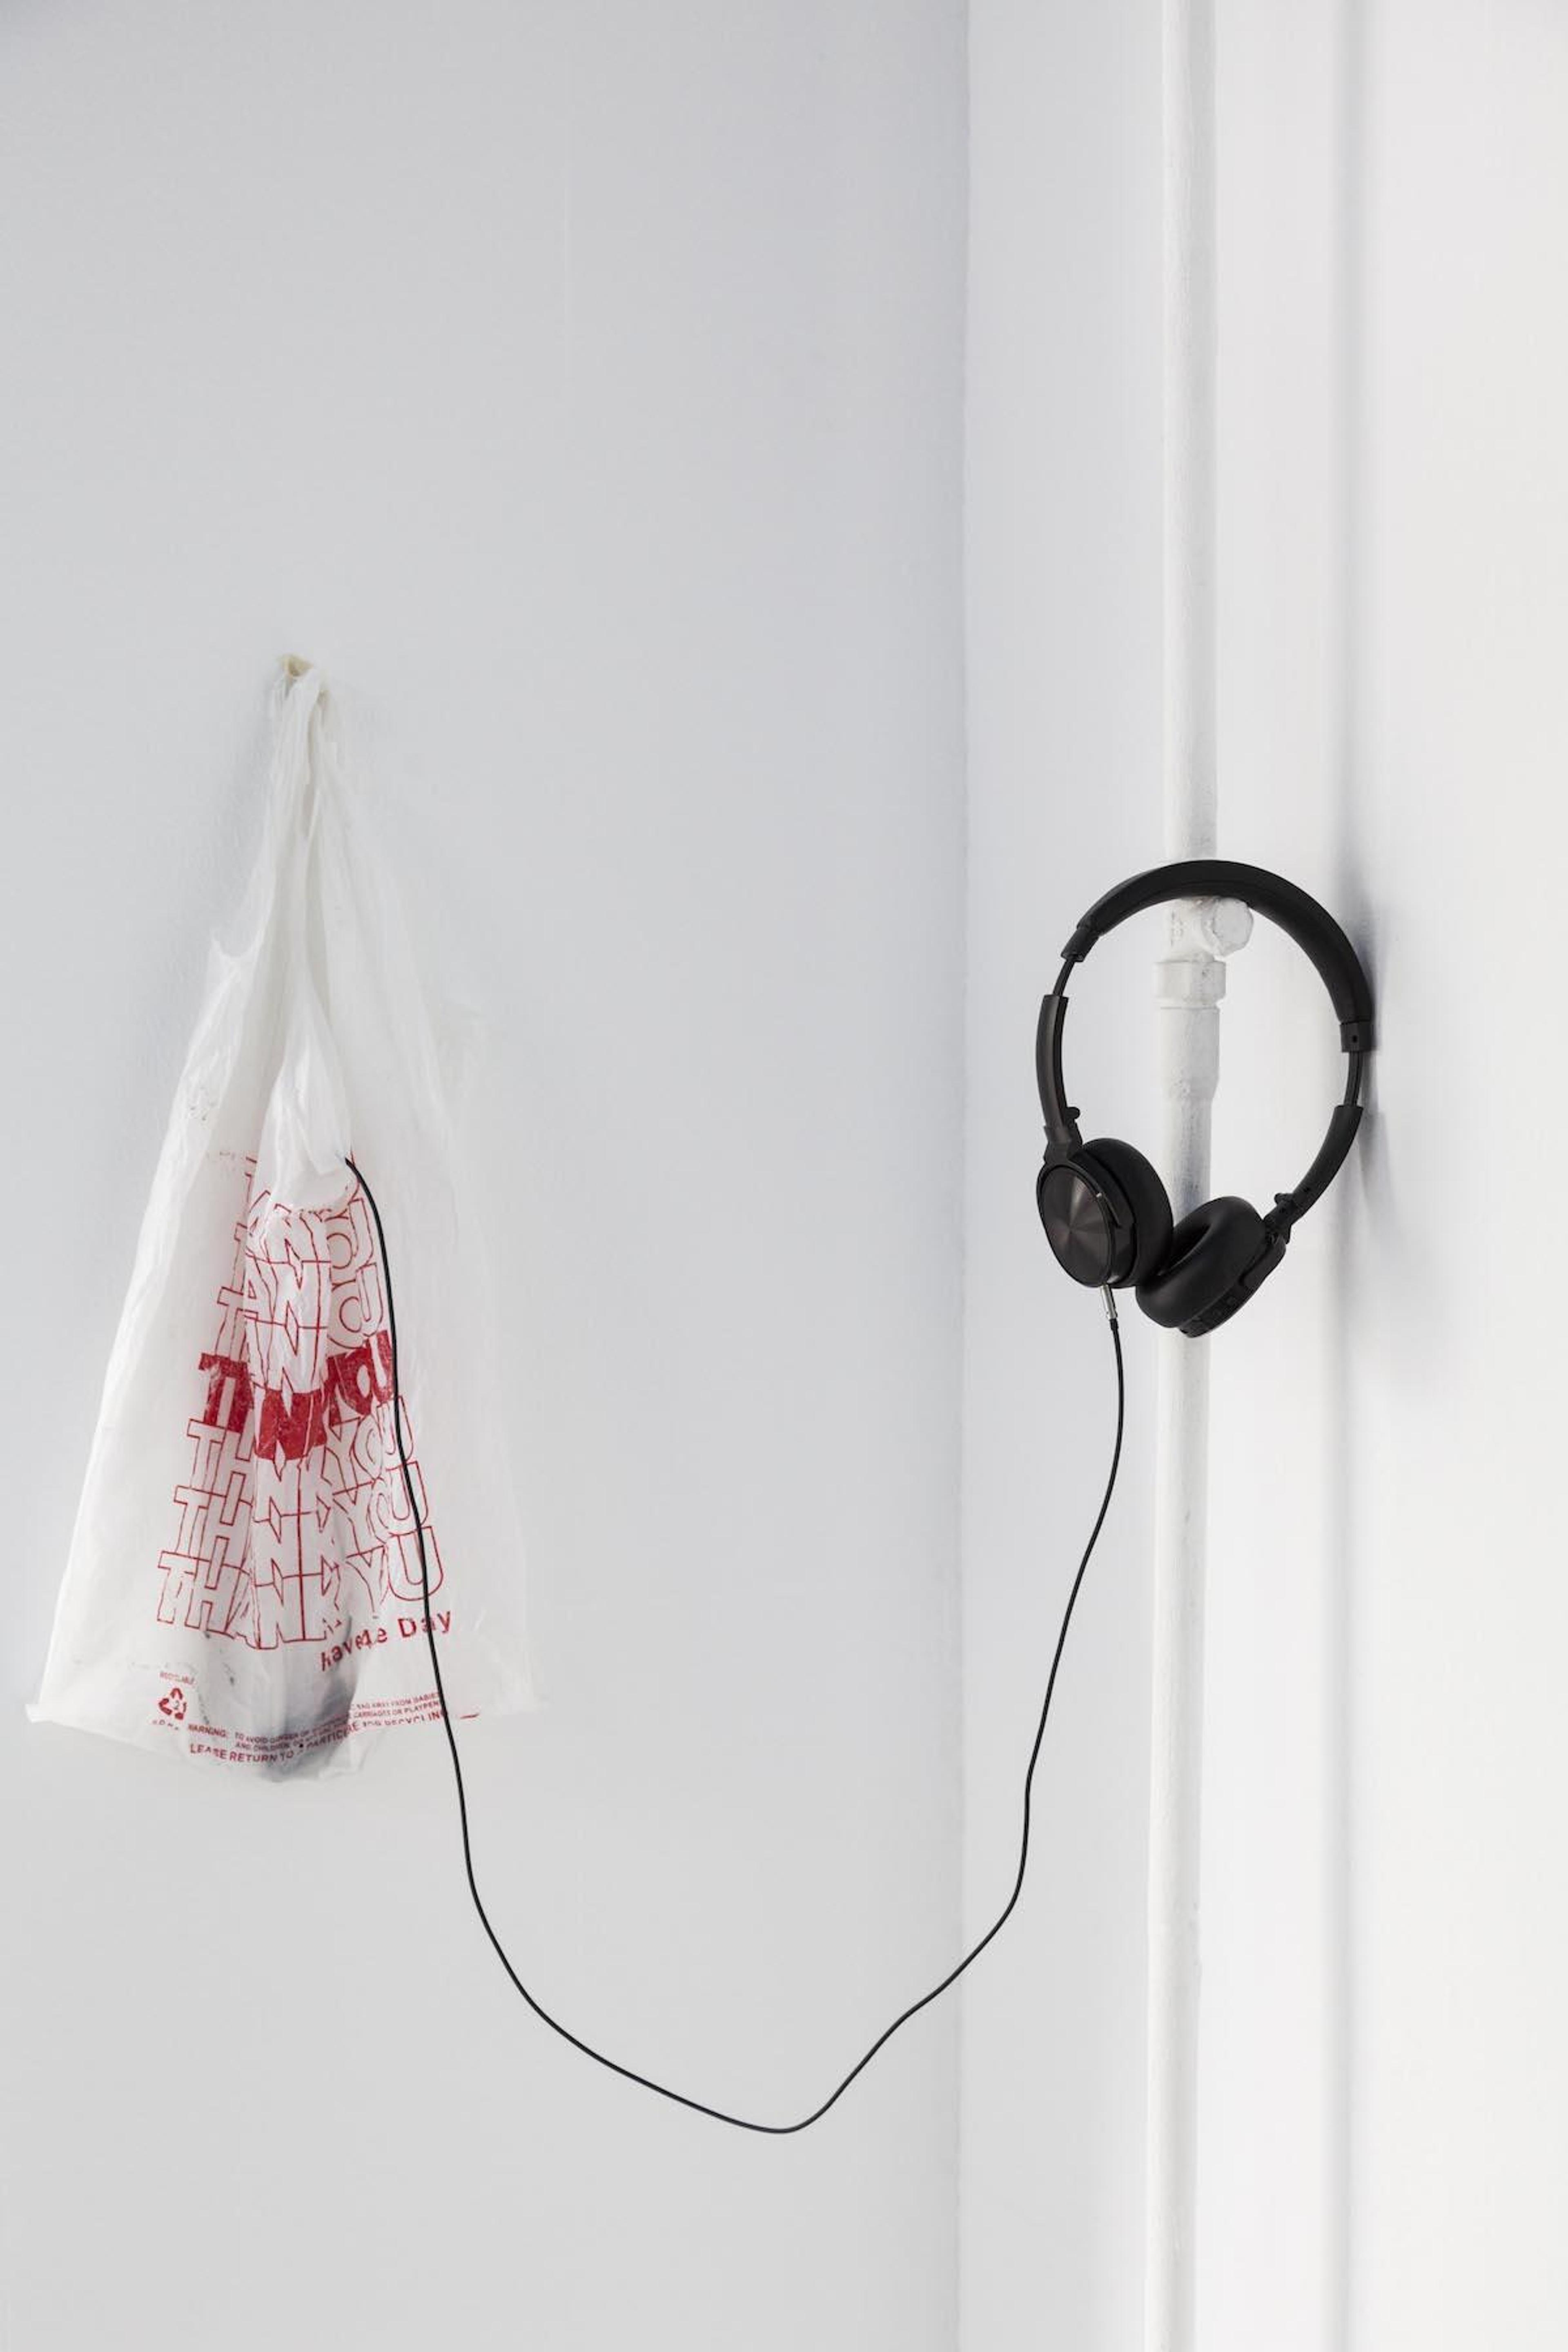 Noele Ody Thank You, Fuck You, 2012, Plastic bag &bdquo;Thank You&ldquo;, Mp3 player with looped song, headphones